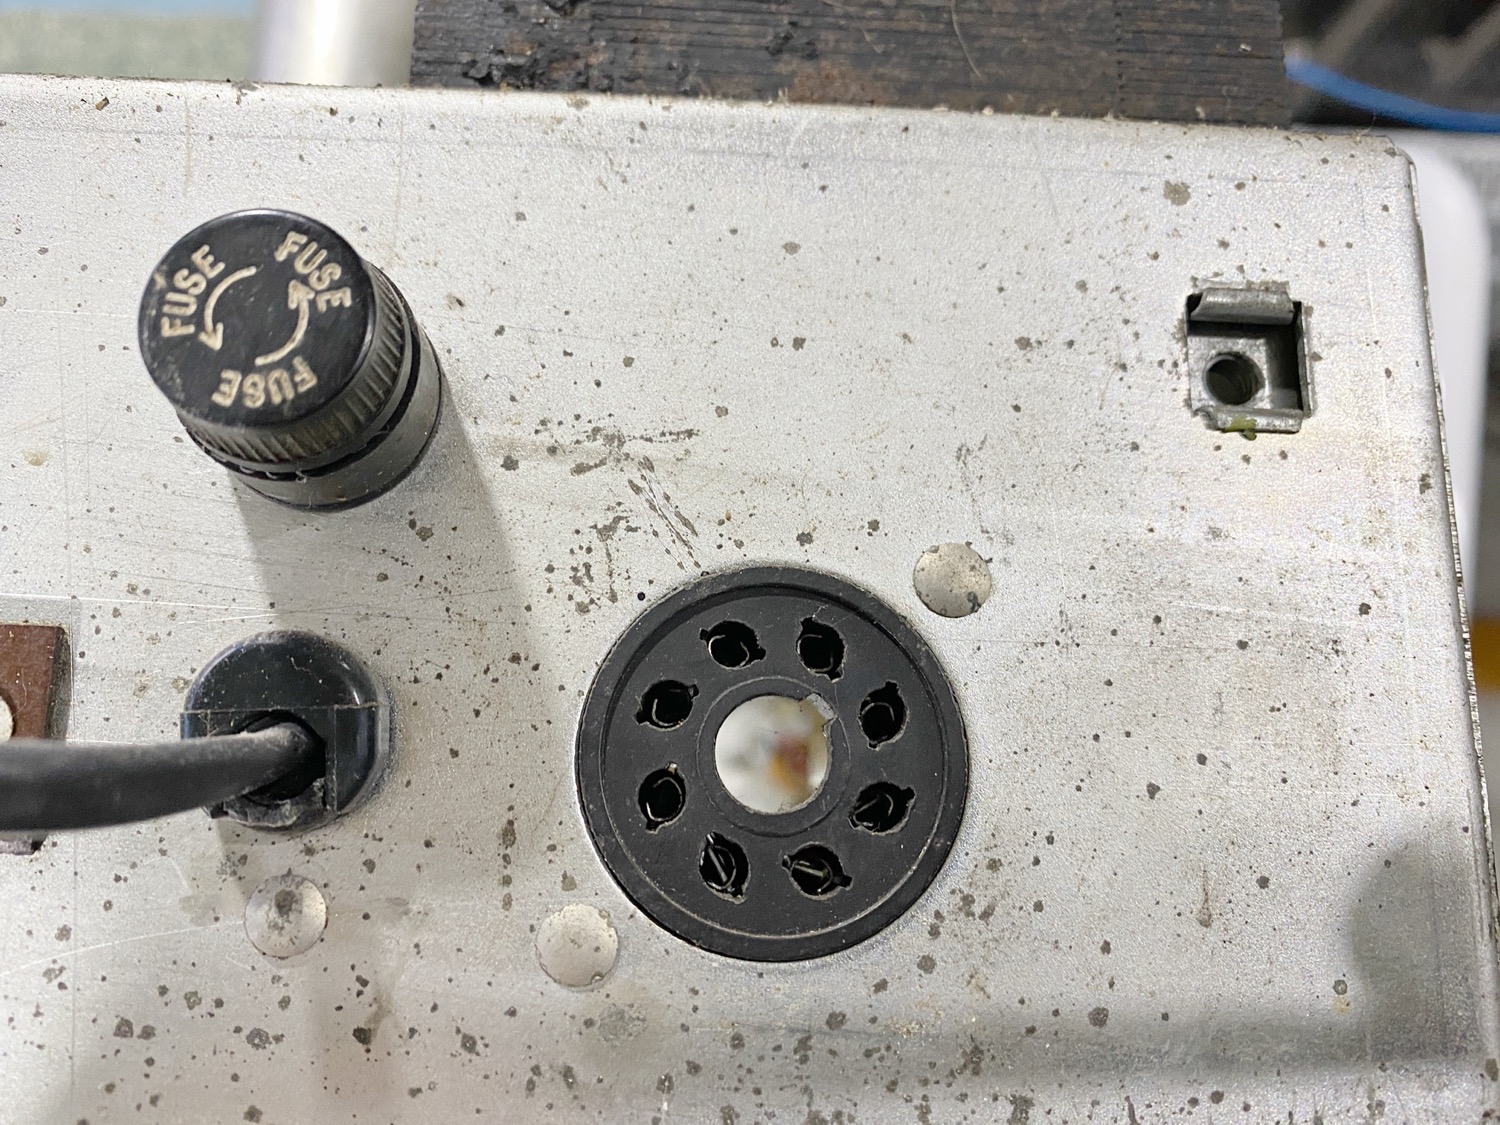 The Voltage Selection Socket with a missing plug??